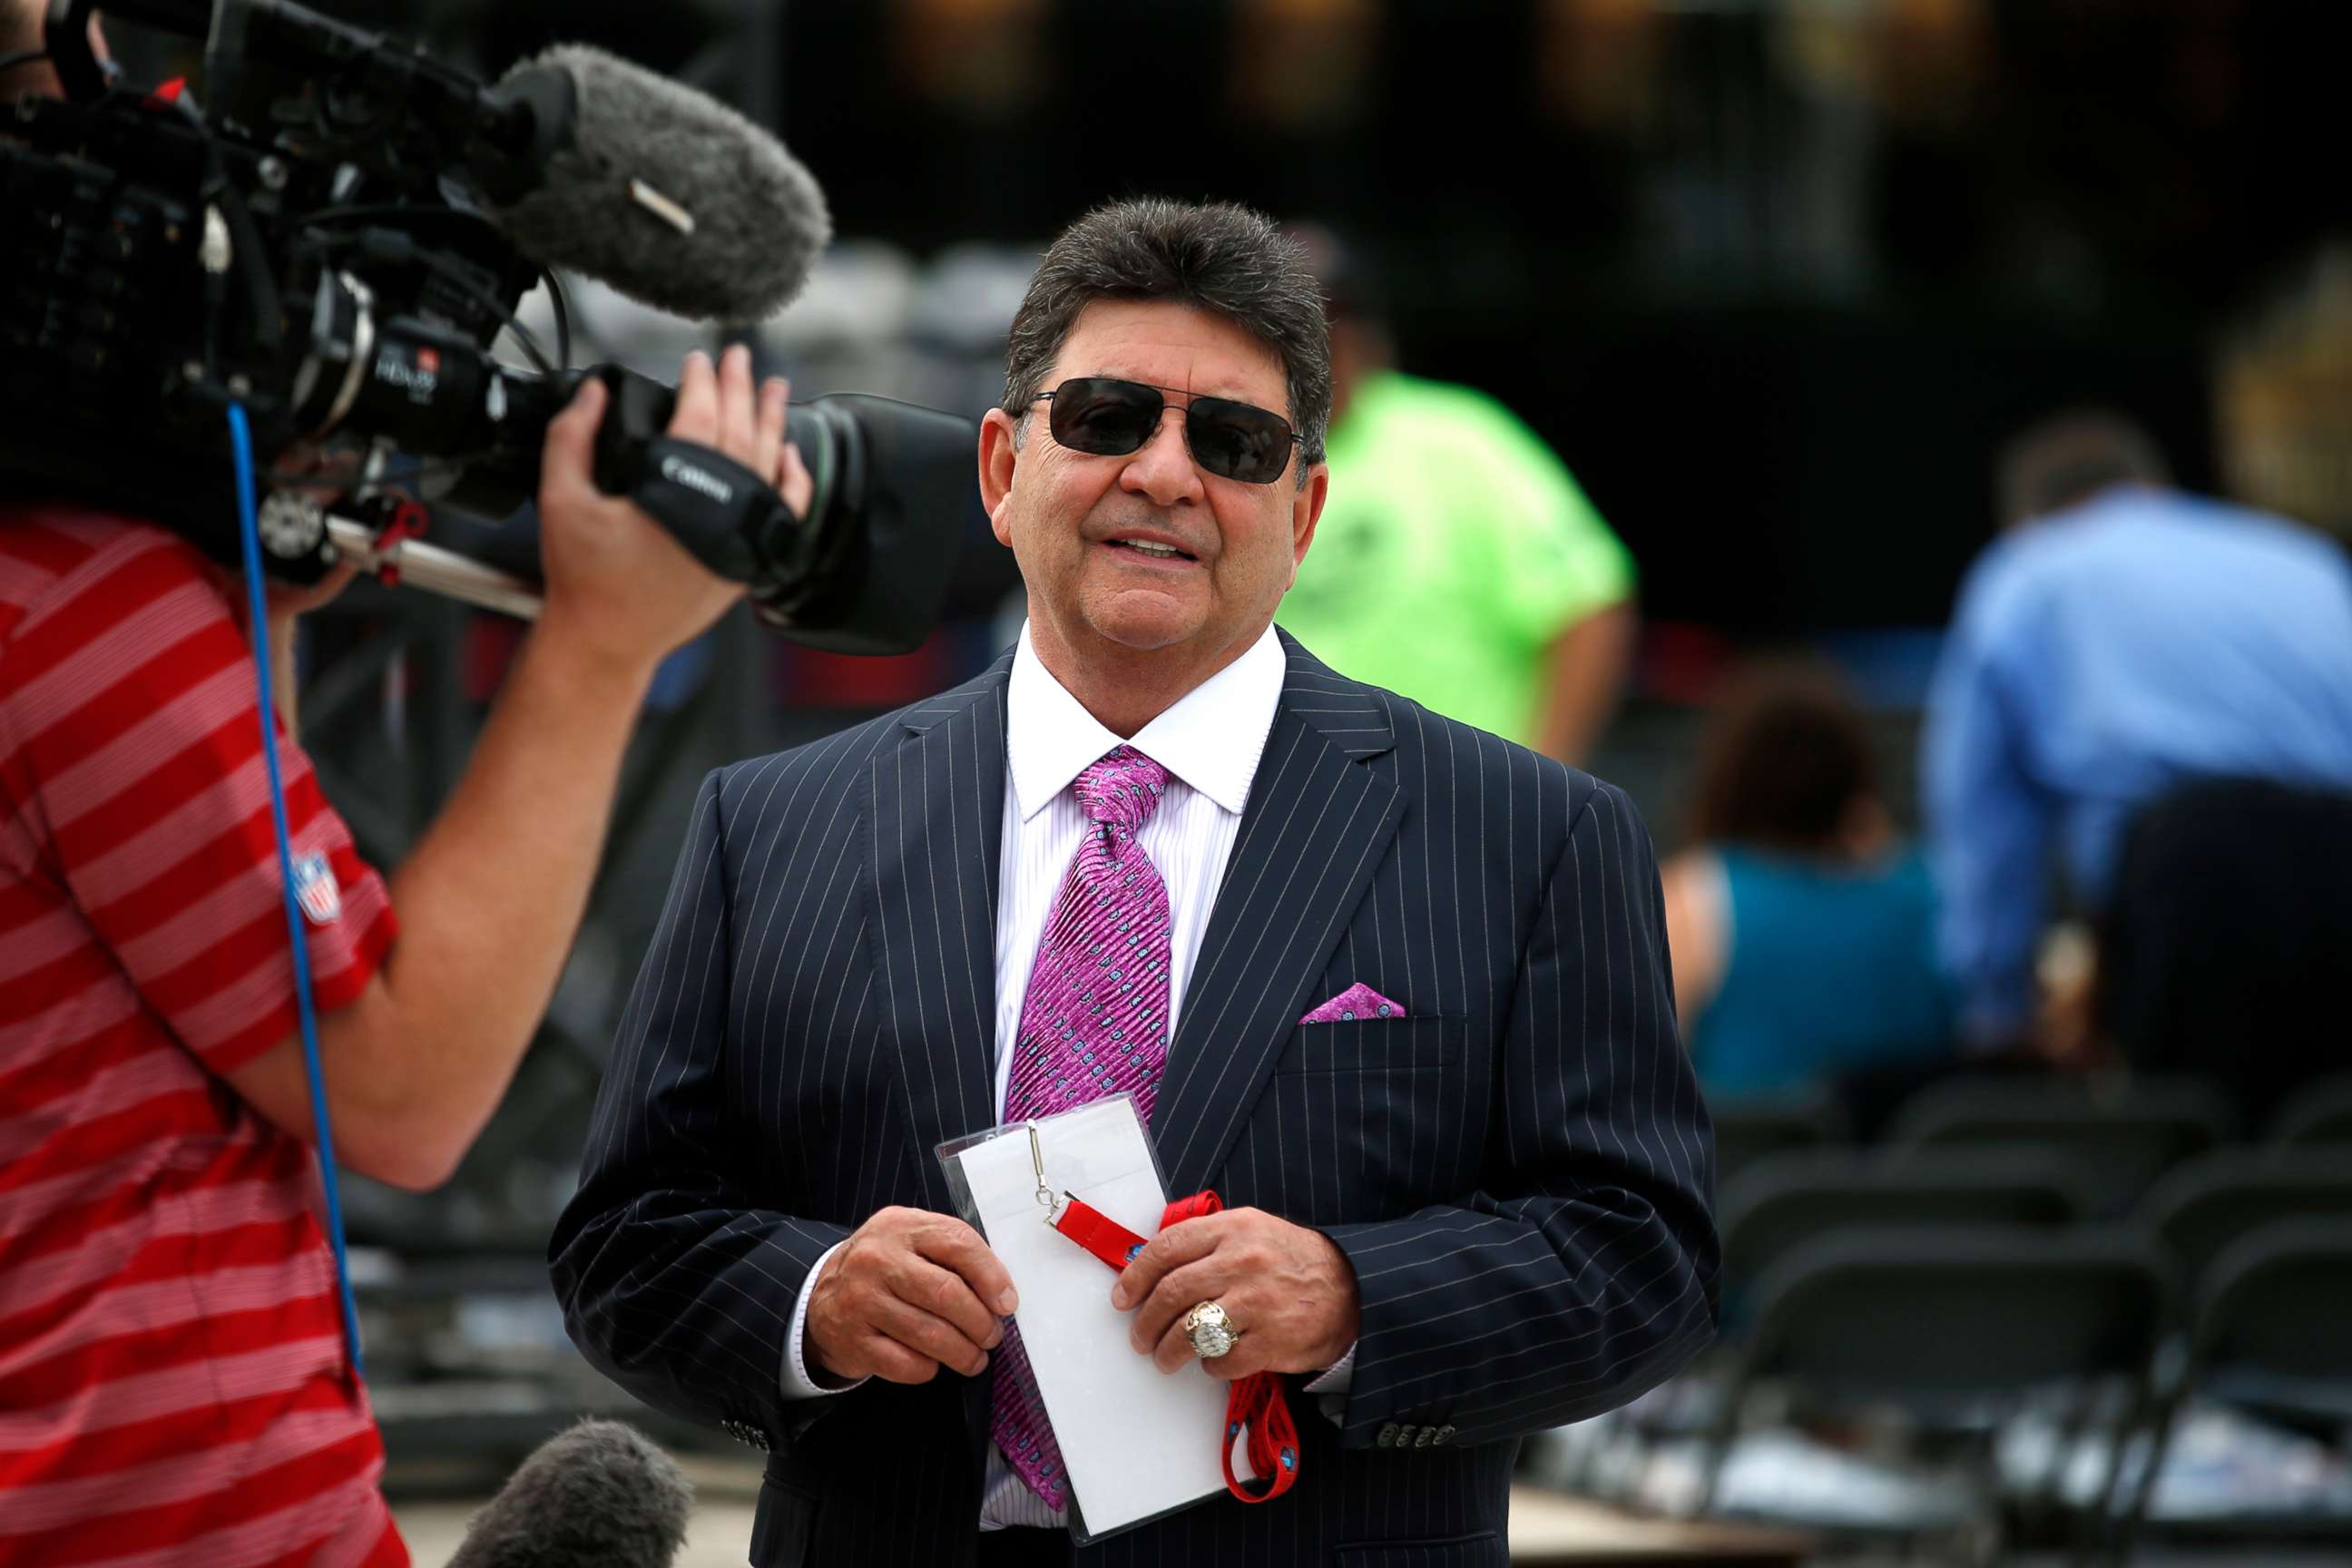 PHOTO: Former owner of the San Francisco 49ers Edward DeBartolo, Jr., is interviewed before the Pro Football Hall of Fame ceremony at Tom Benson Hall of Fame Stadium in Canton, Ohio, Aug. 8, 2015.